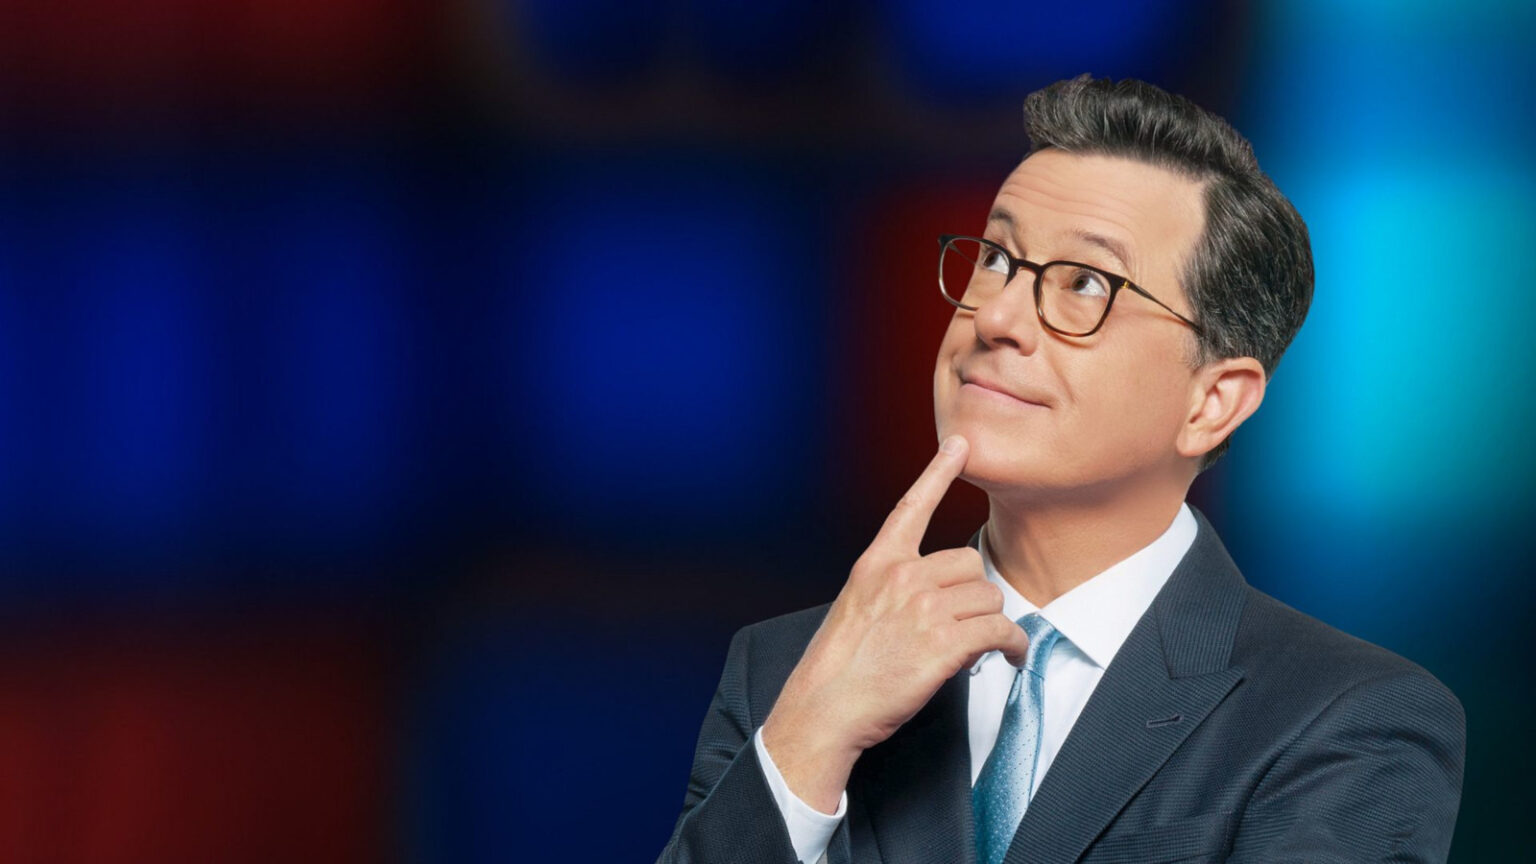 Will Stephen Colbert host his late-night show in front of an audience again? See how soon you'll be able to snag tickets to 'The Late Show' now!